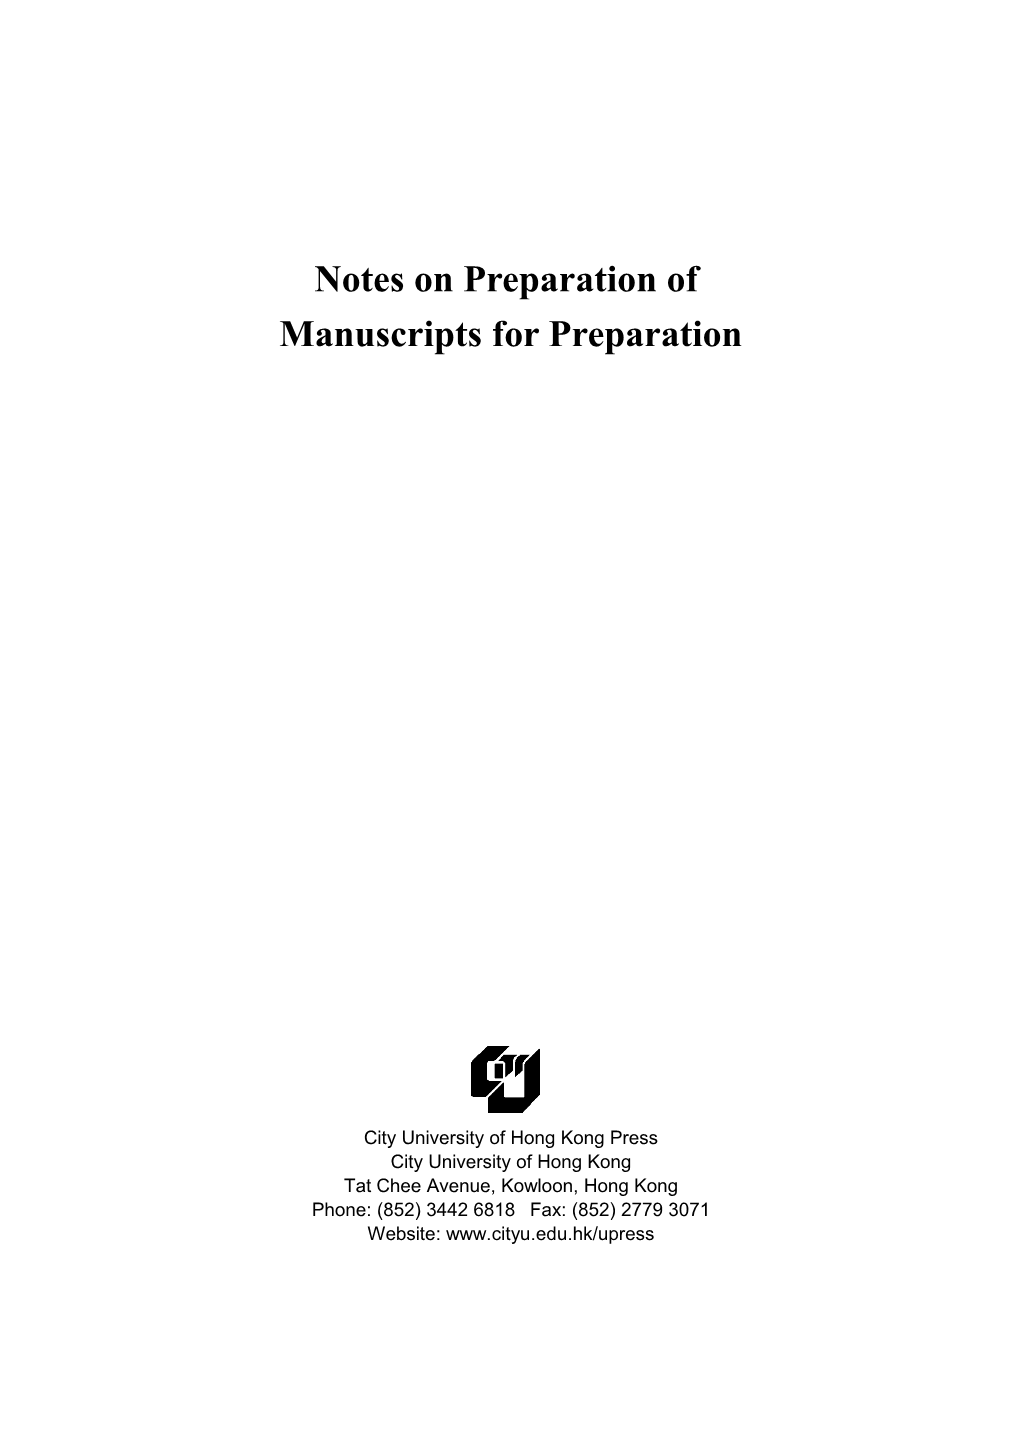 Notes on the Preparation Of